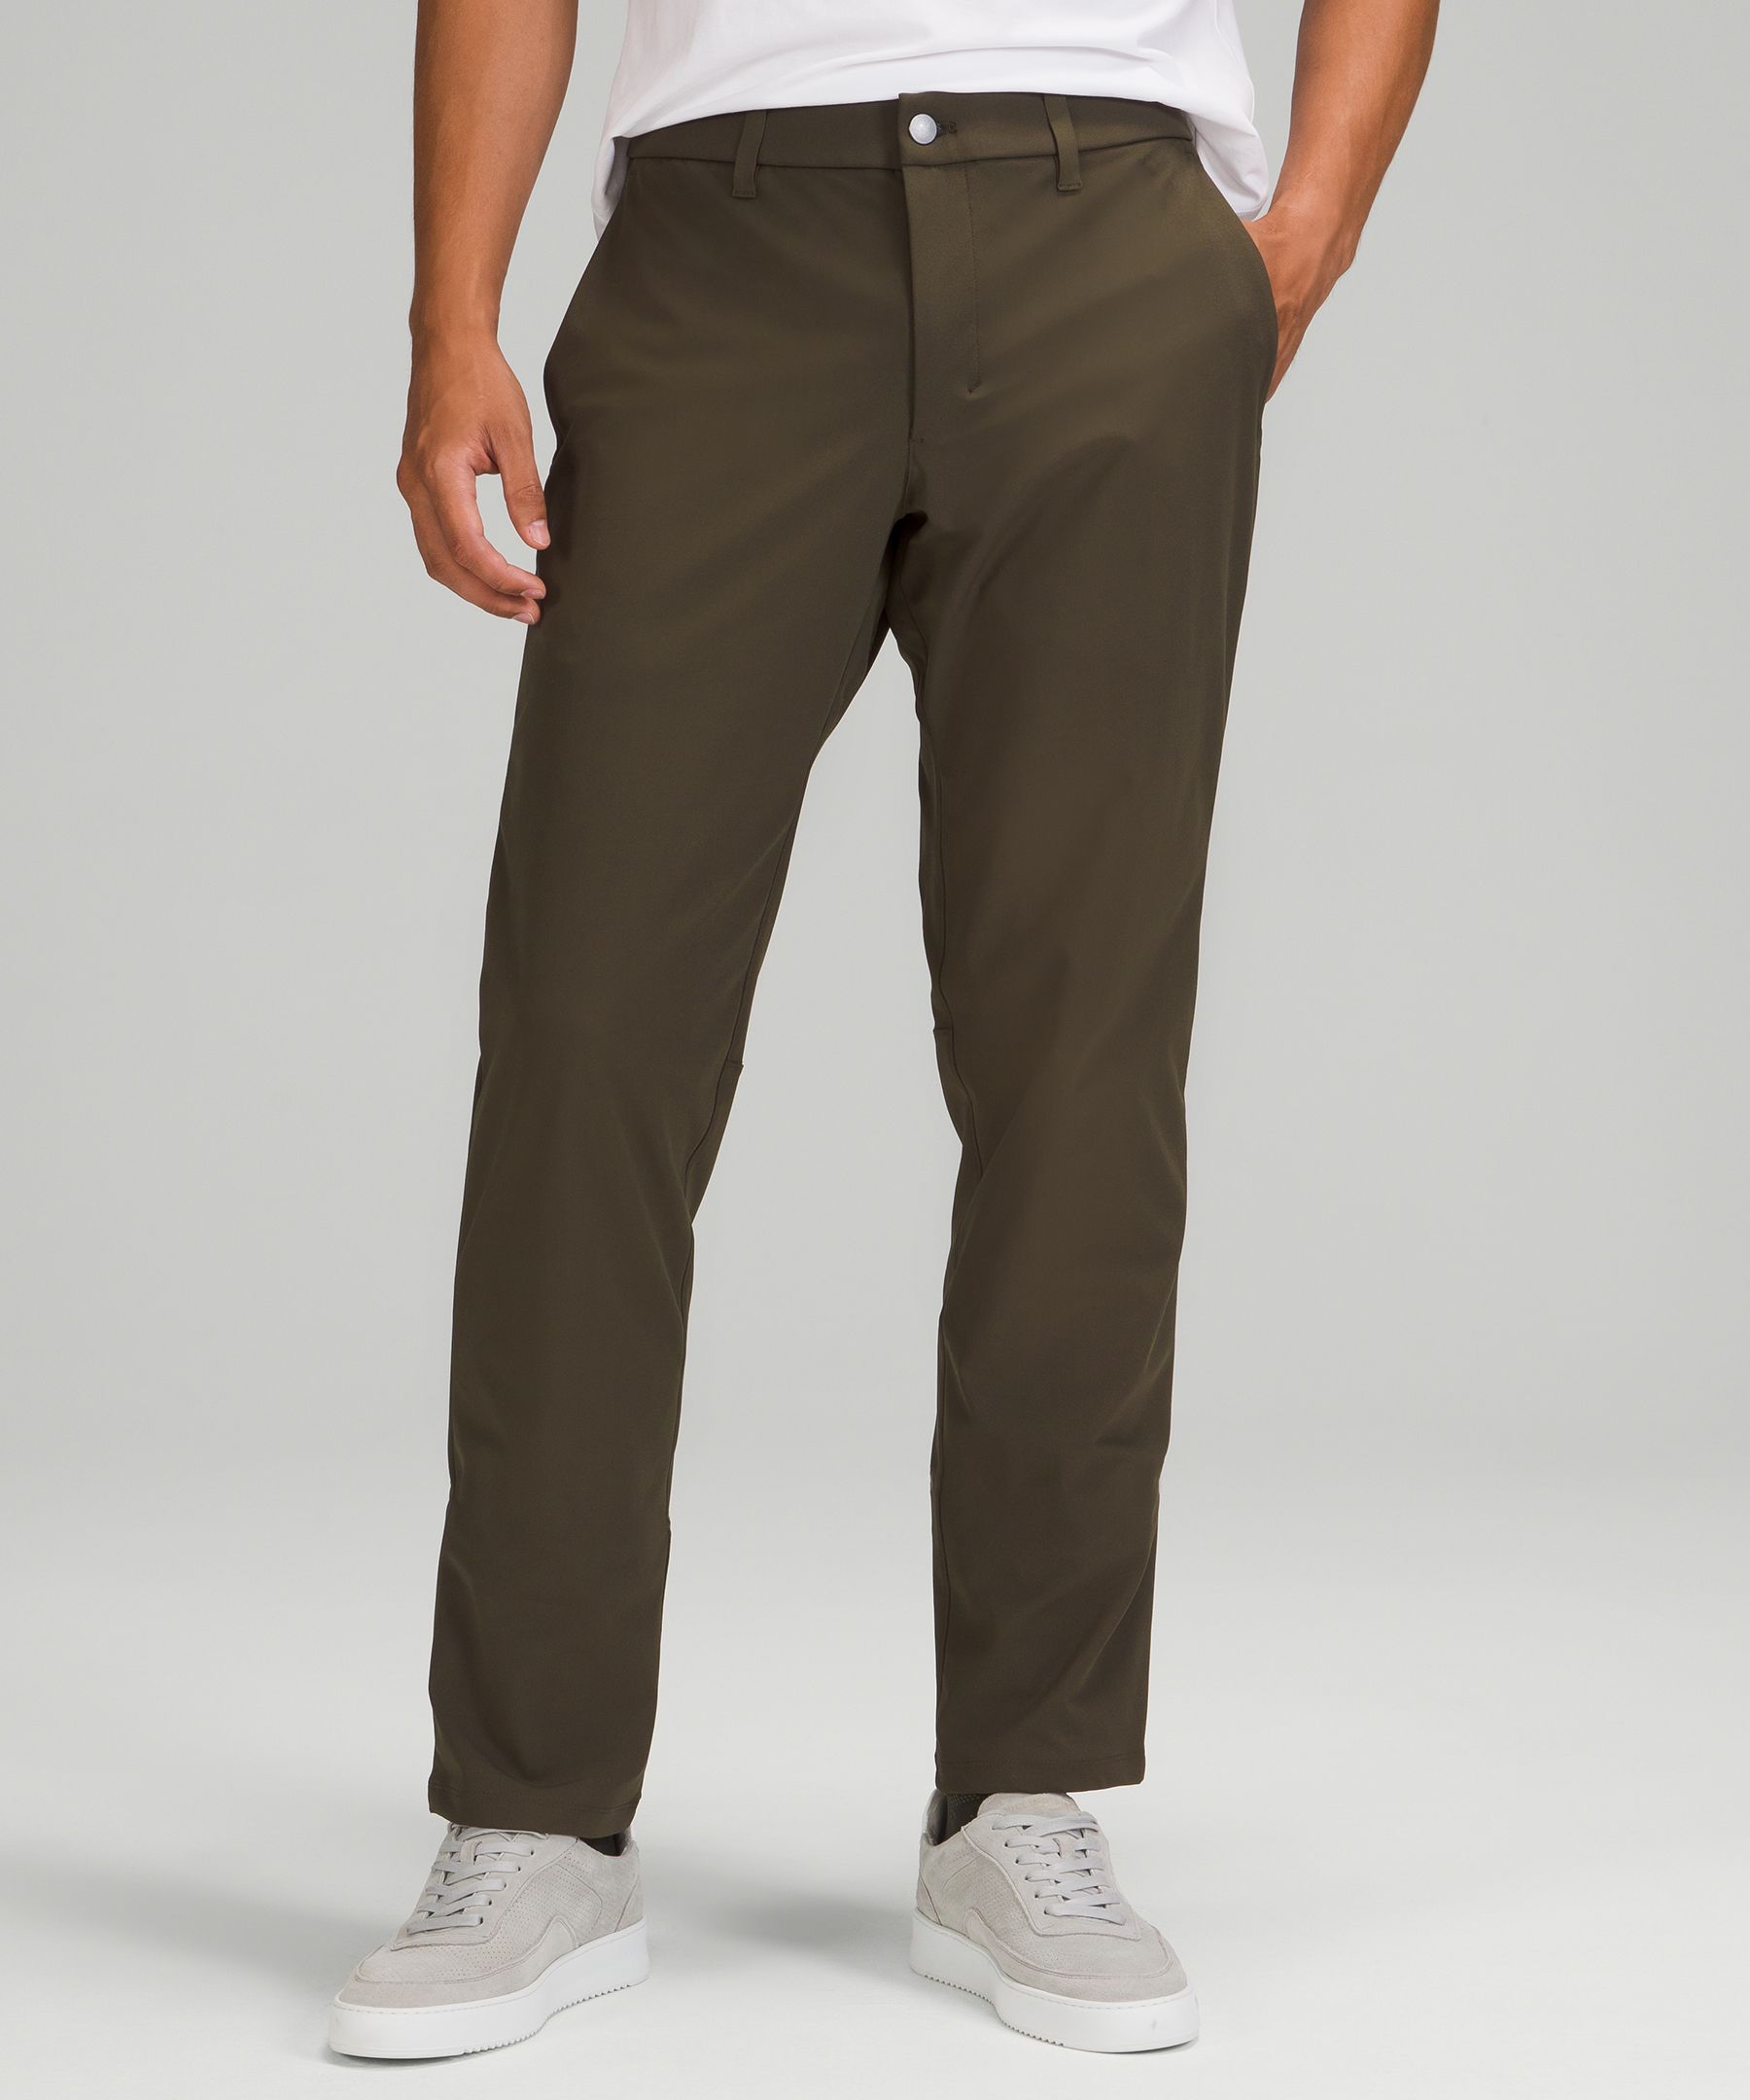 Lululemon Commission Pant Relaxed Reviewed  International Society of  Precision Agriculture